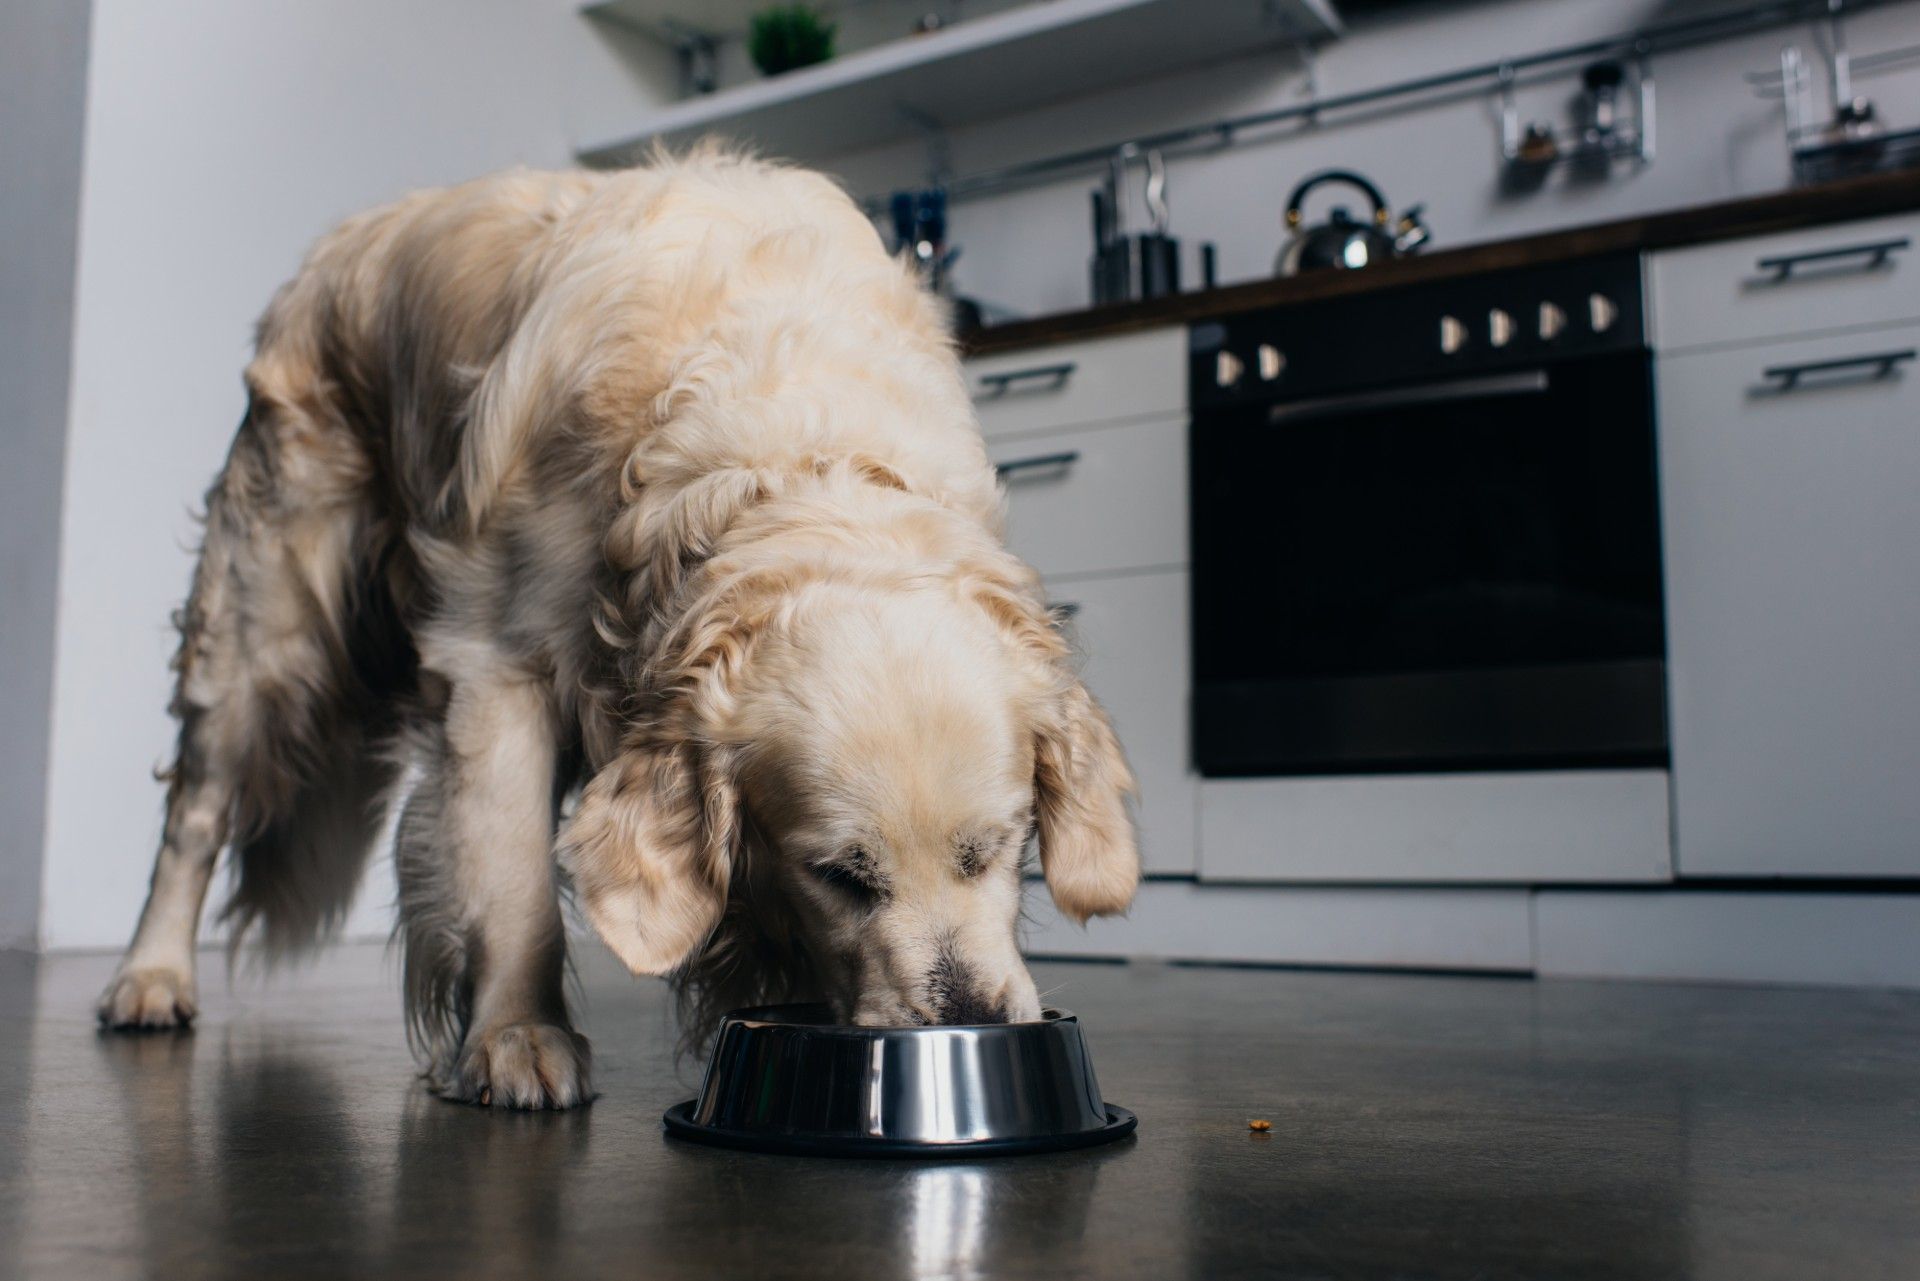 Golden retriever eating from dog food bowl on kitchen floor